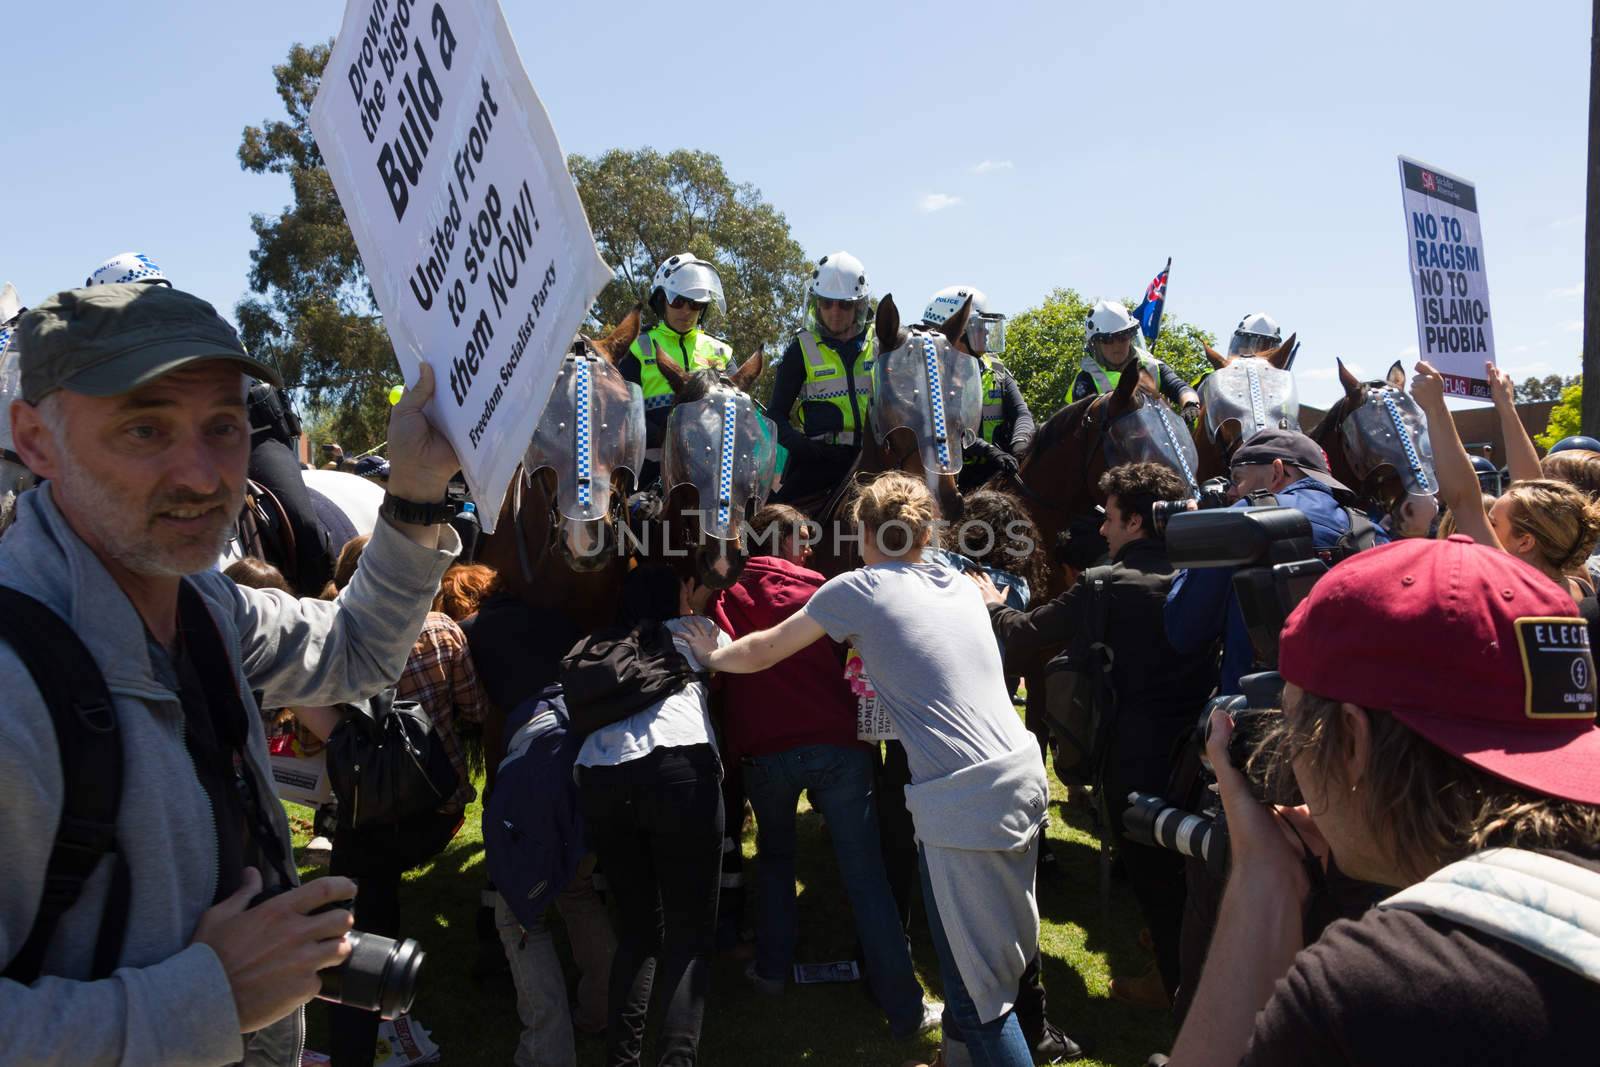 Anti Racism protesters clash with Reclaim Australia by davidhewison